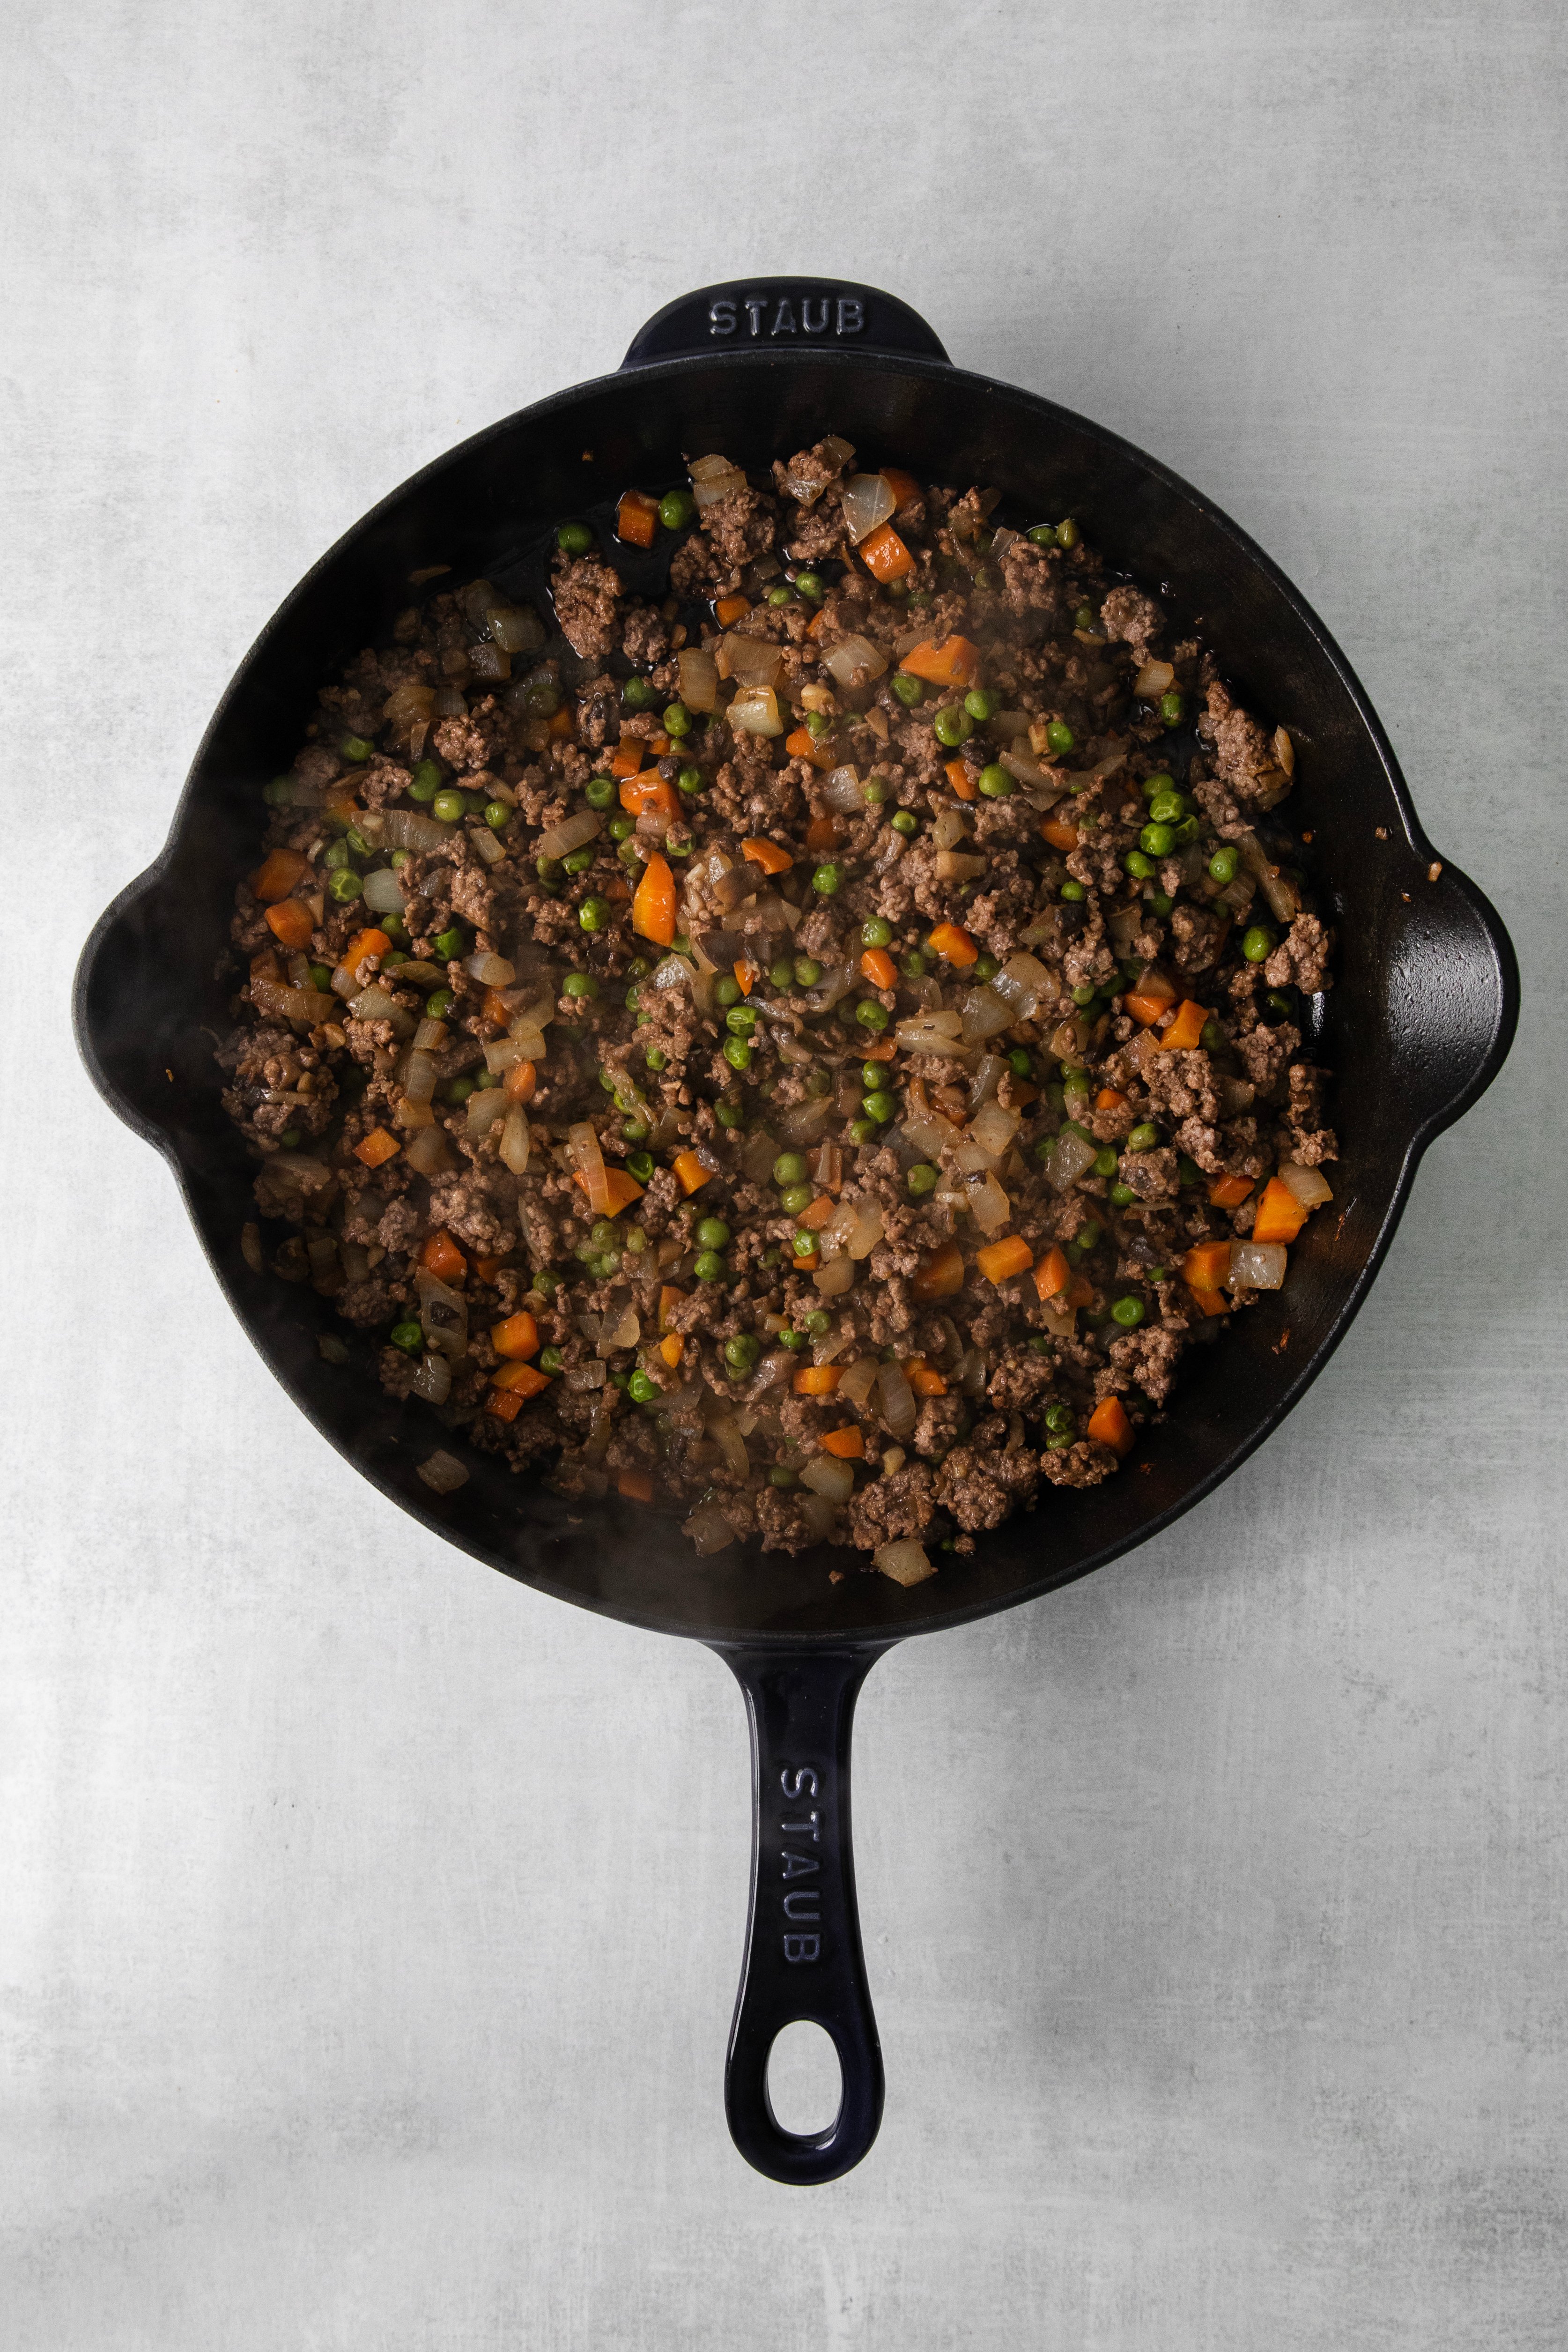 ground beef and veggies in a skillet.